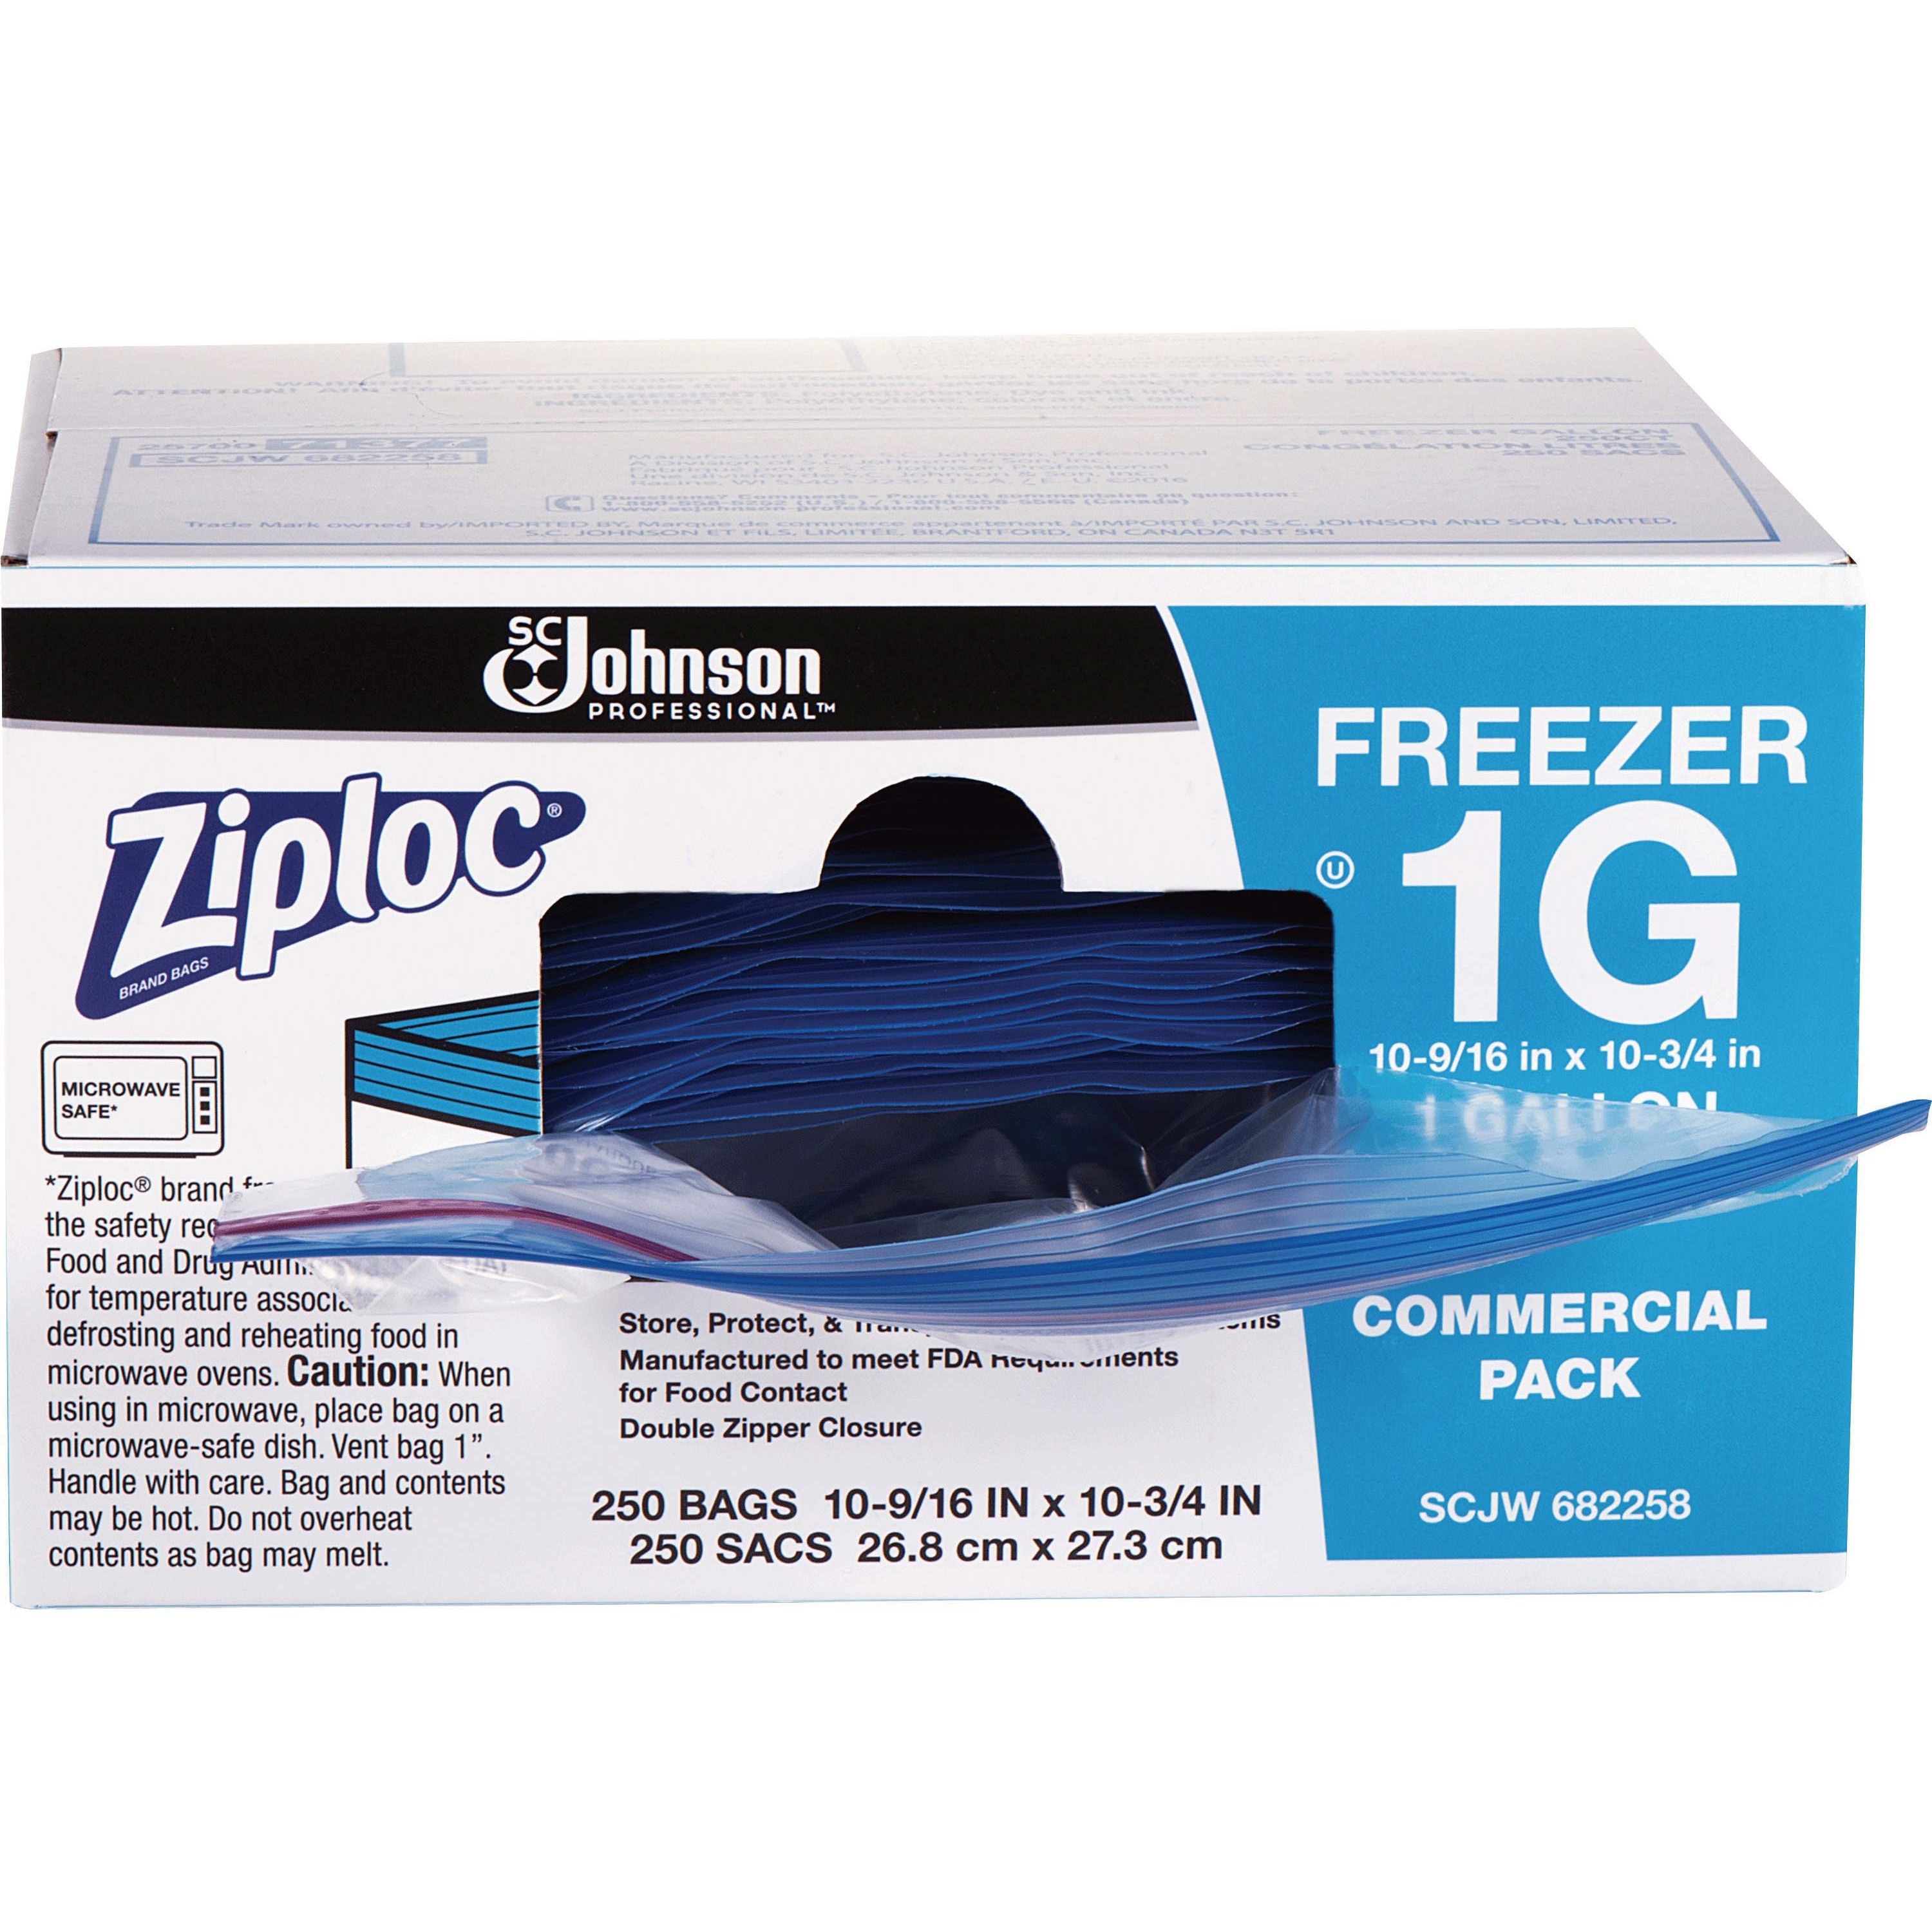 First Street Jumbo 2-Gallon Reclosable Freezer Bags with Snap and Seal Zip  Lock Top, 13x15-5/8, 50 Ct (Twin Pack)